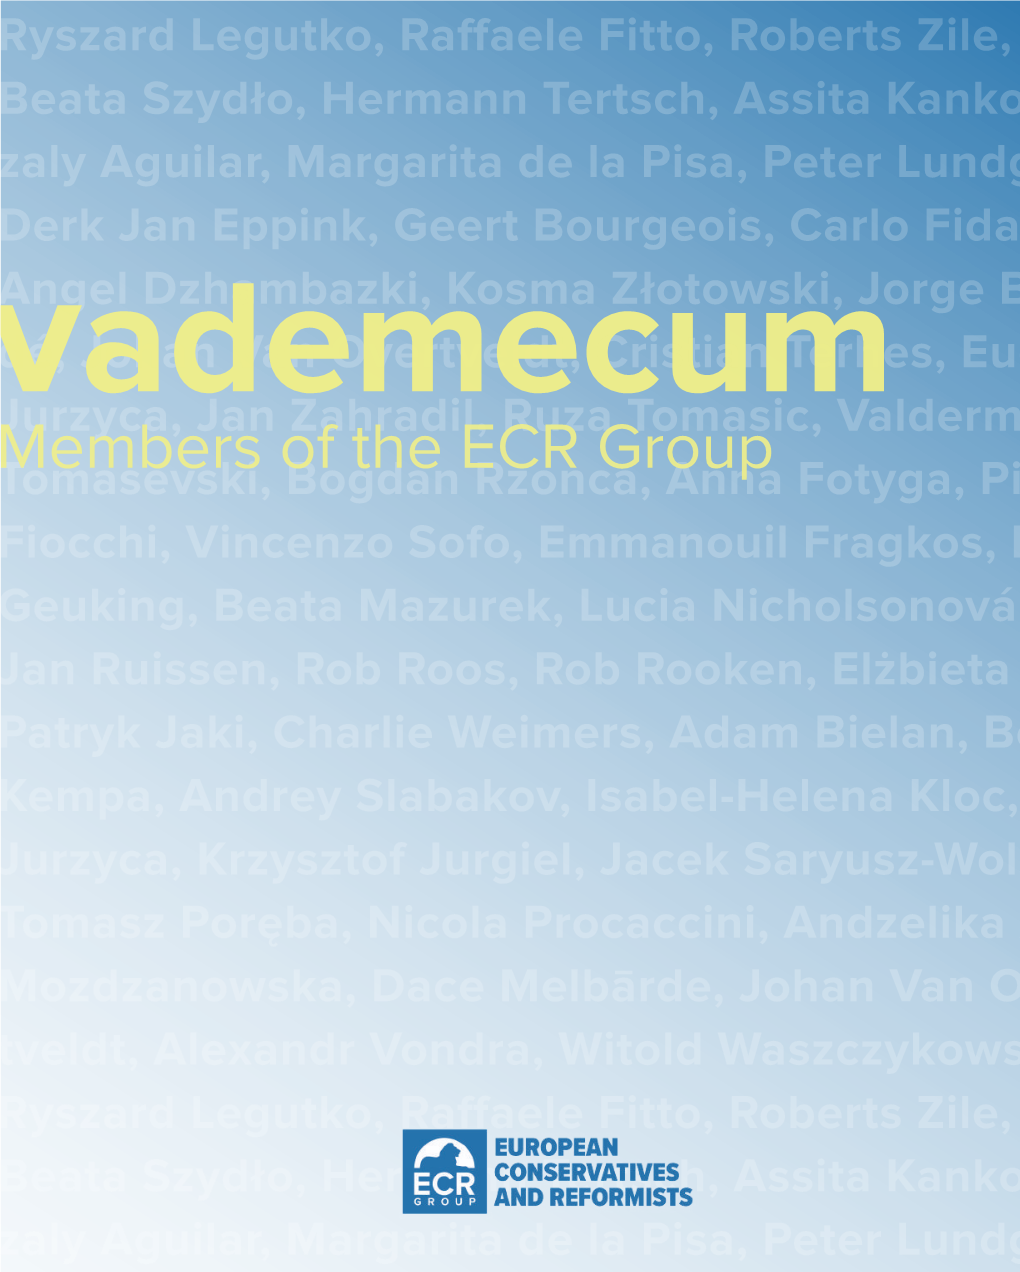 Members of the ECR Group